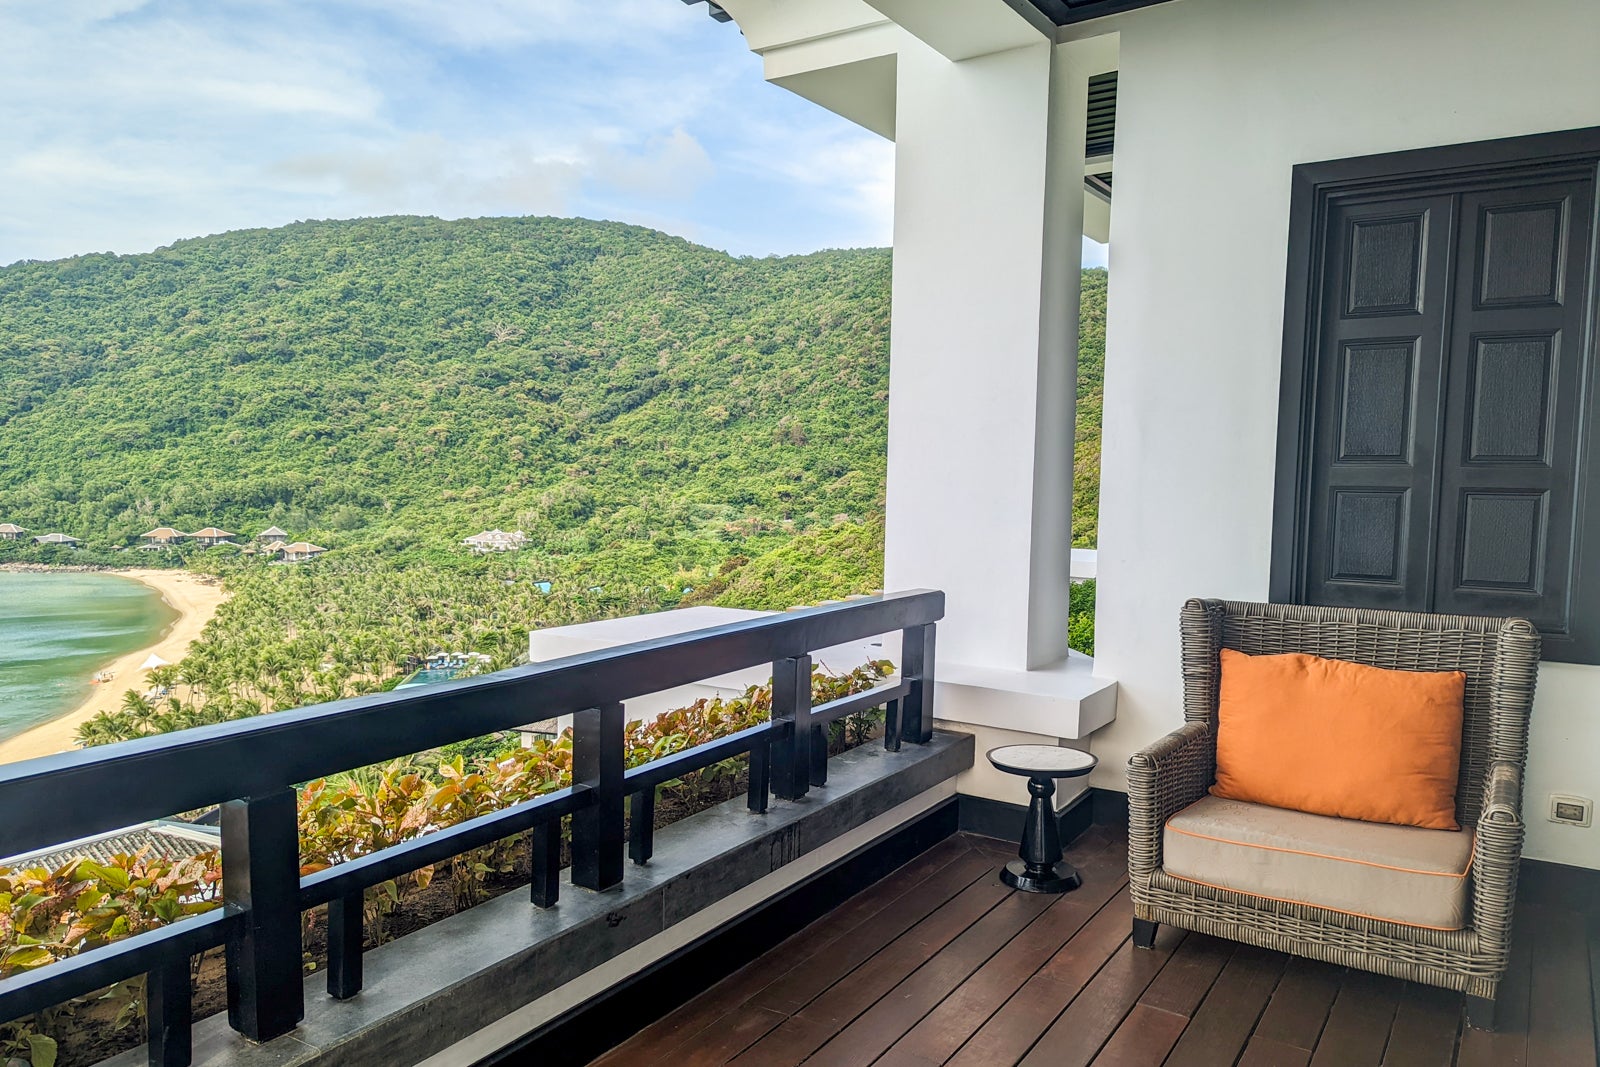 Balcony for InterContinental Danang terrace suite with an ocean view